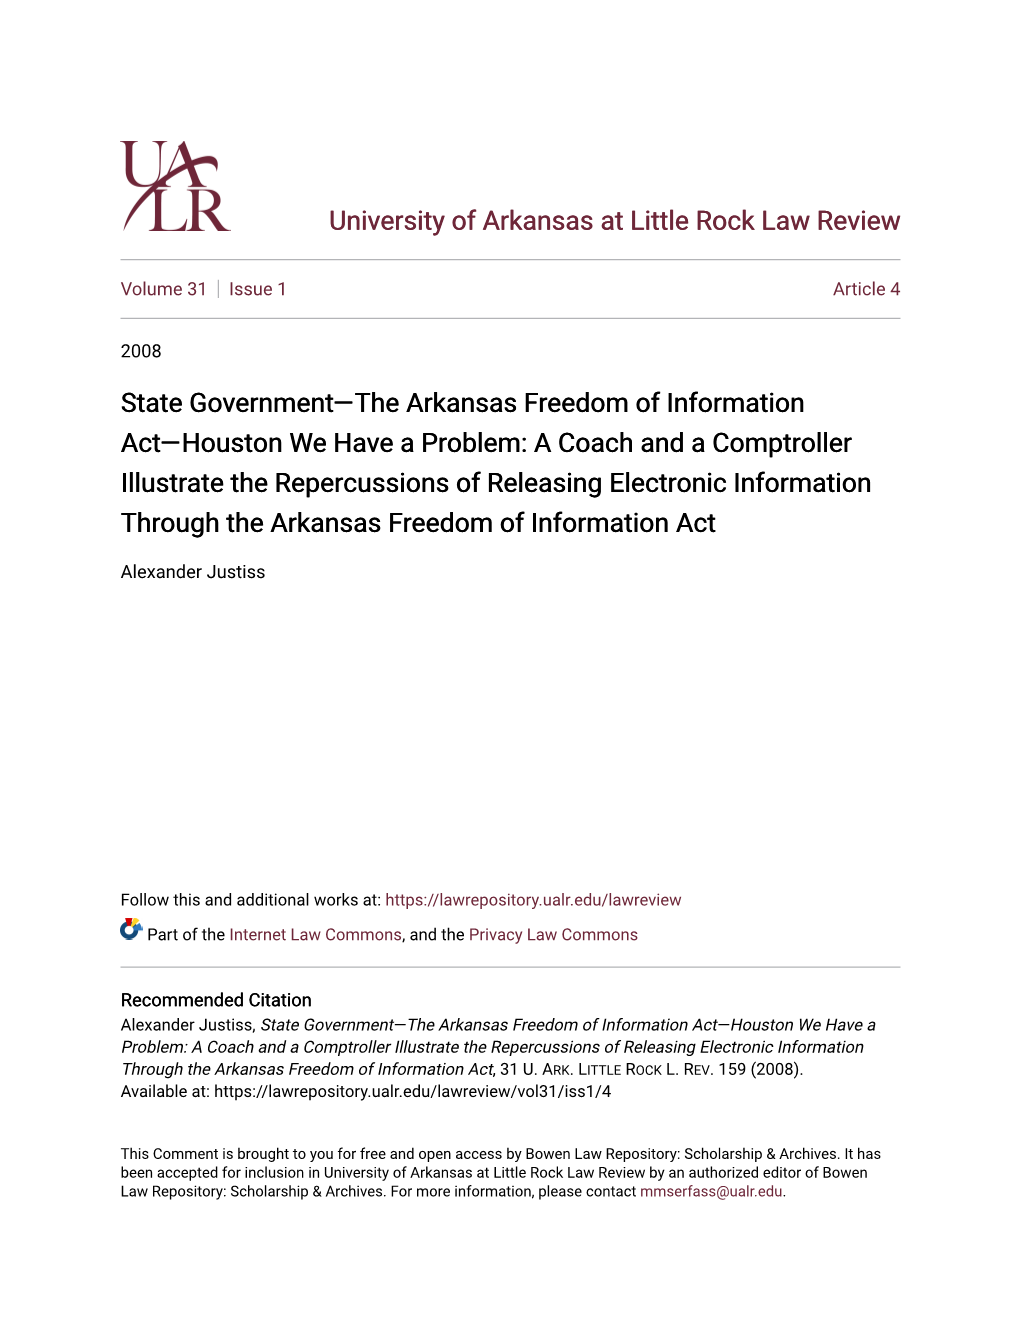 State Government—The Arkansas Freedom of Information Act